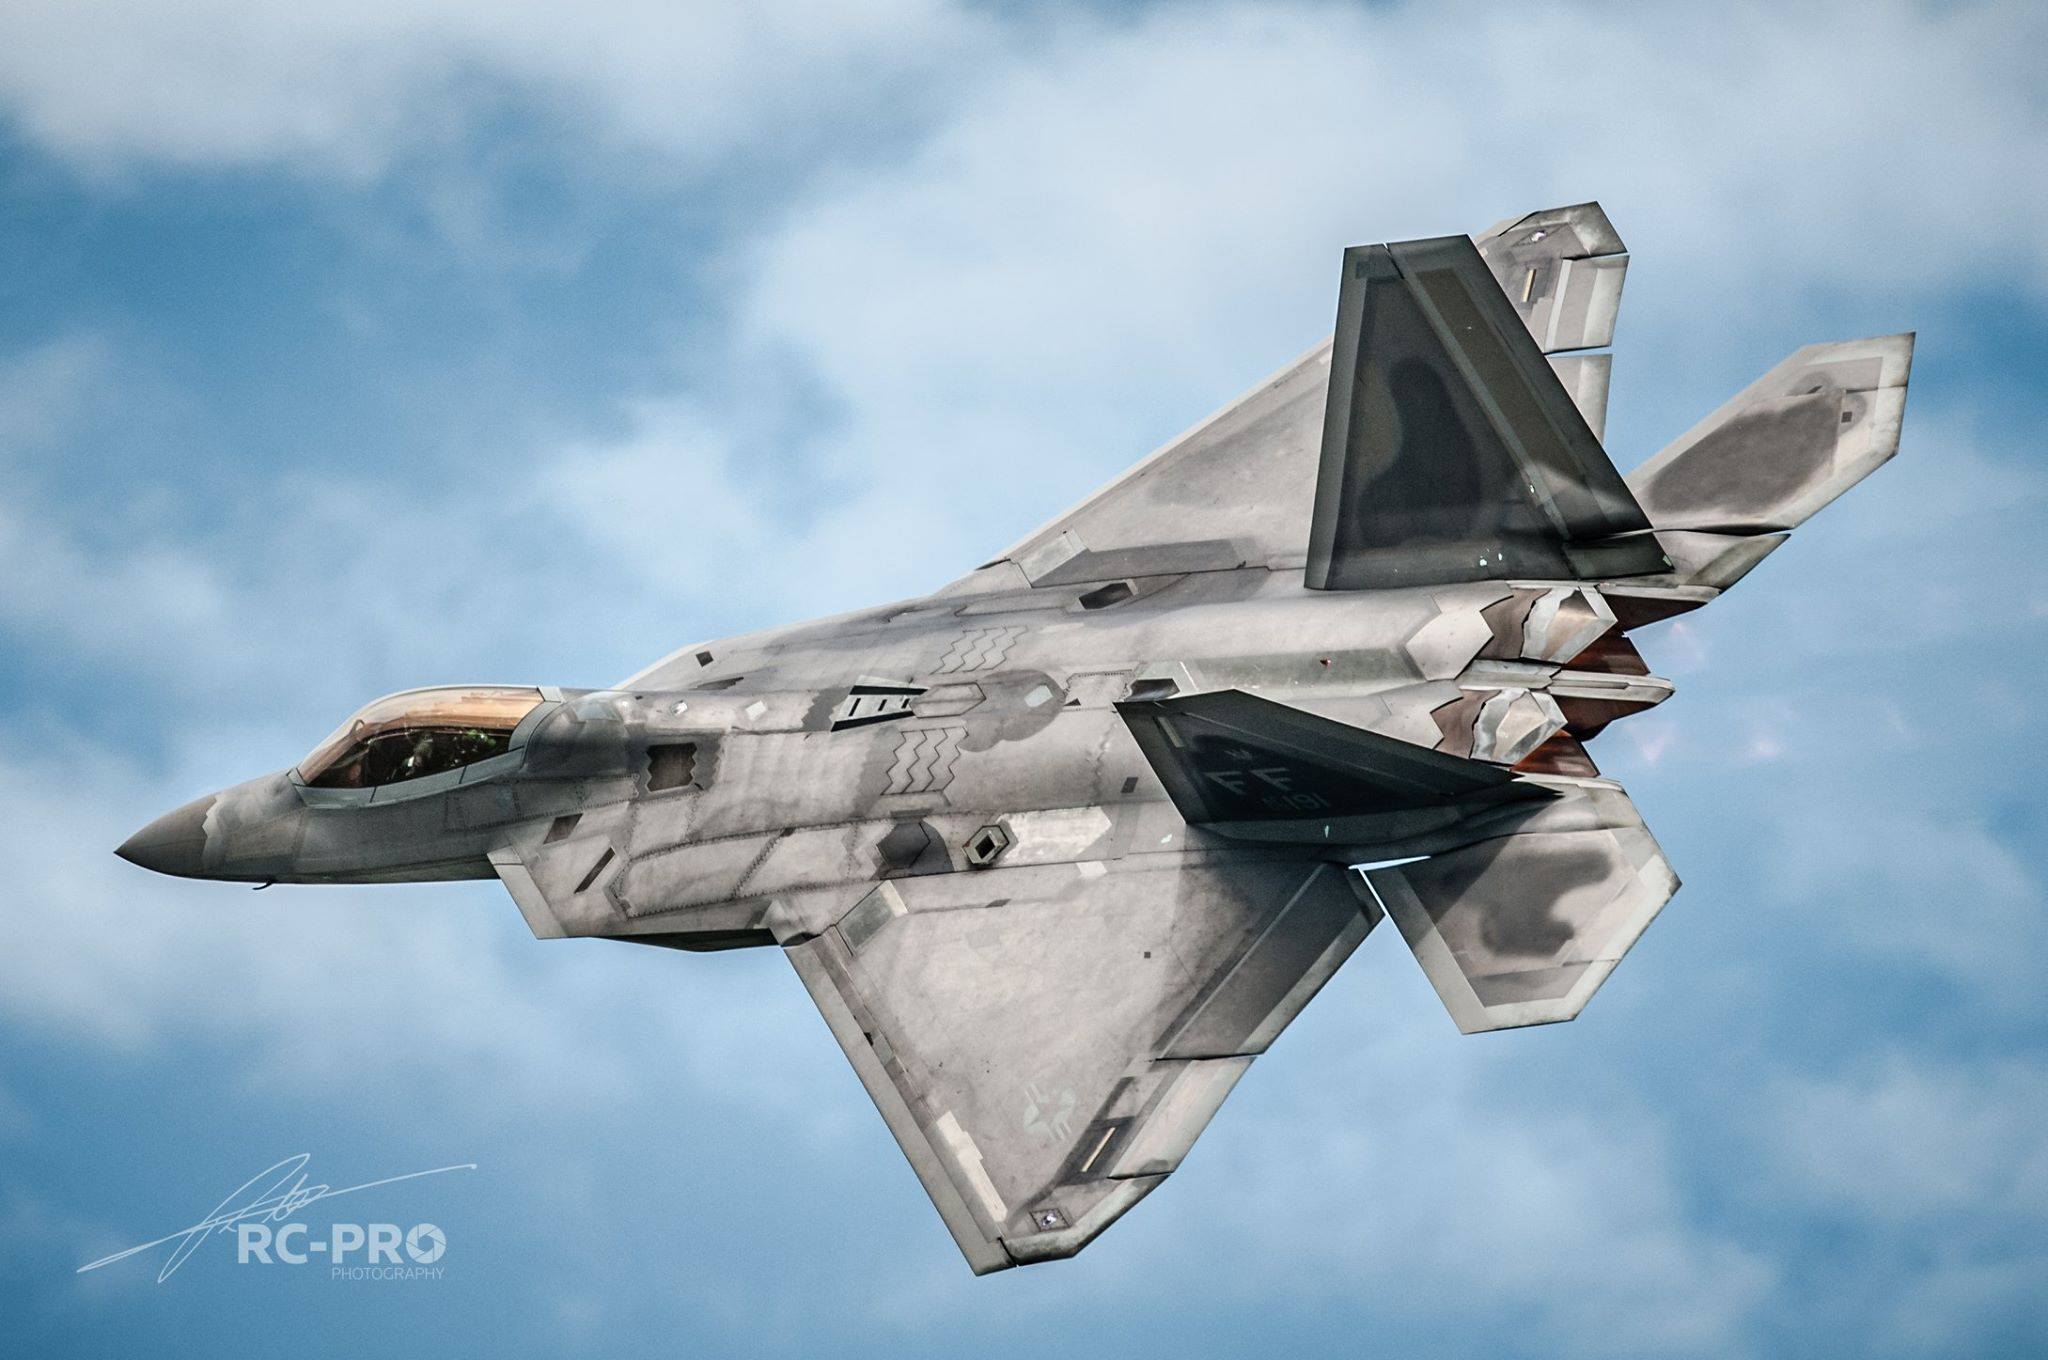 General 2048x1360 F-22 Raptor US Air Force aircraft military aircraft military vehicle vehicle military watermarked jet fighter American aircraft Lockheed Martin